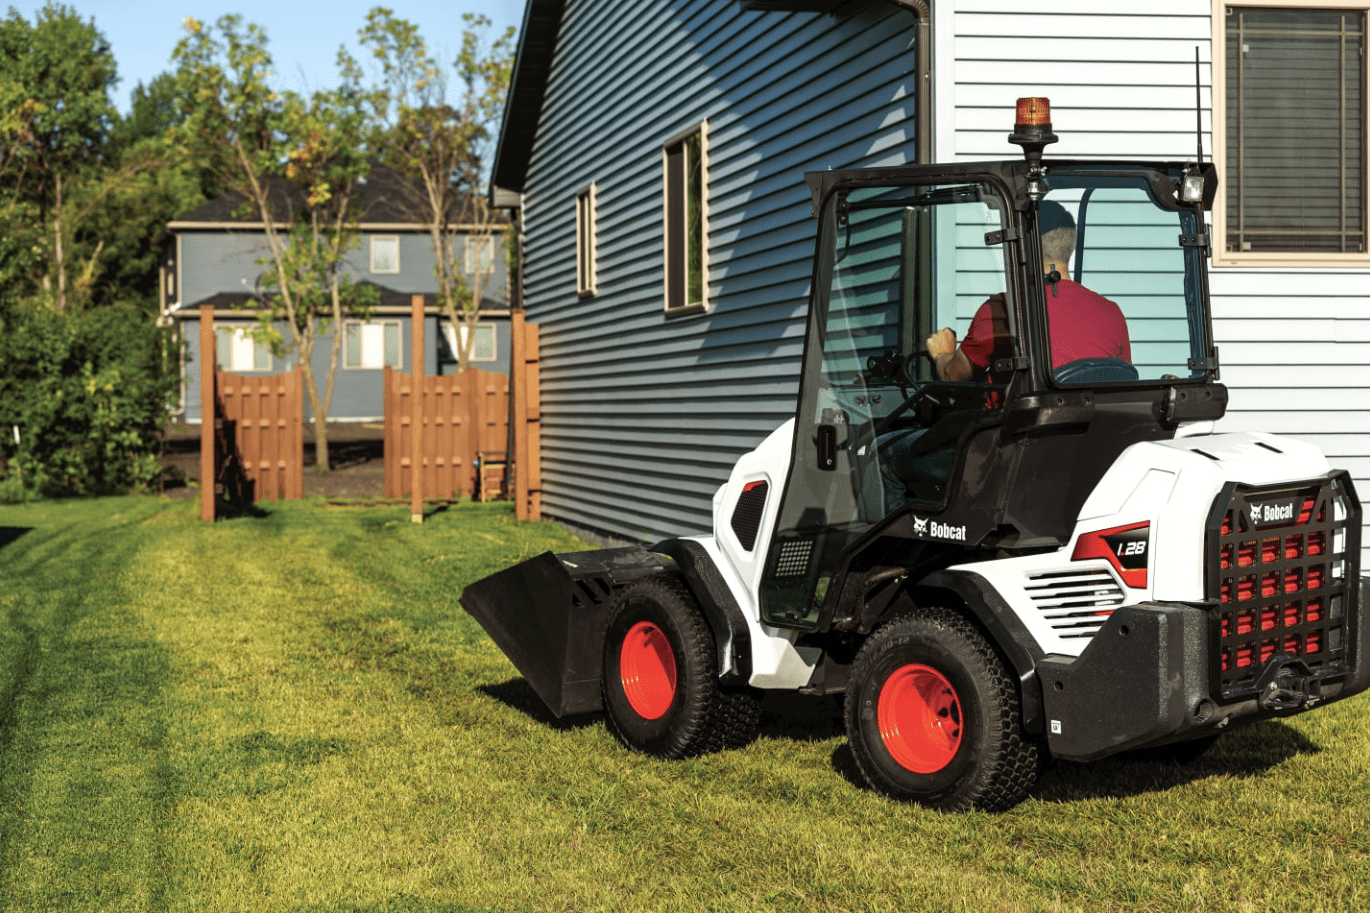 Browse Specs and more for the L28 Small Articulated Loader - Bobcat of Huntsville